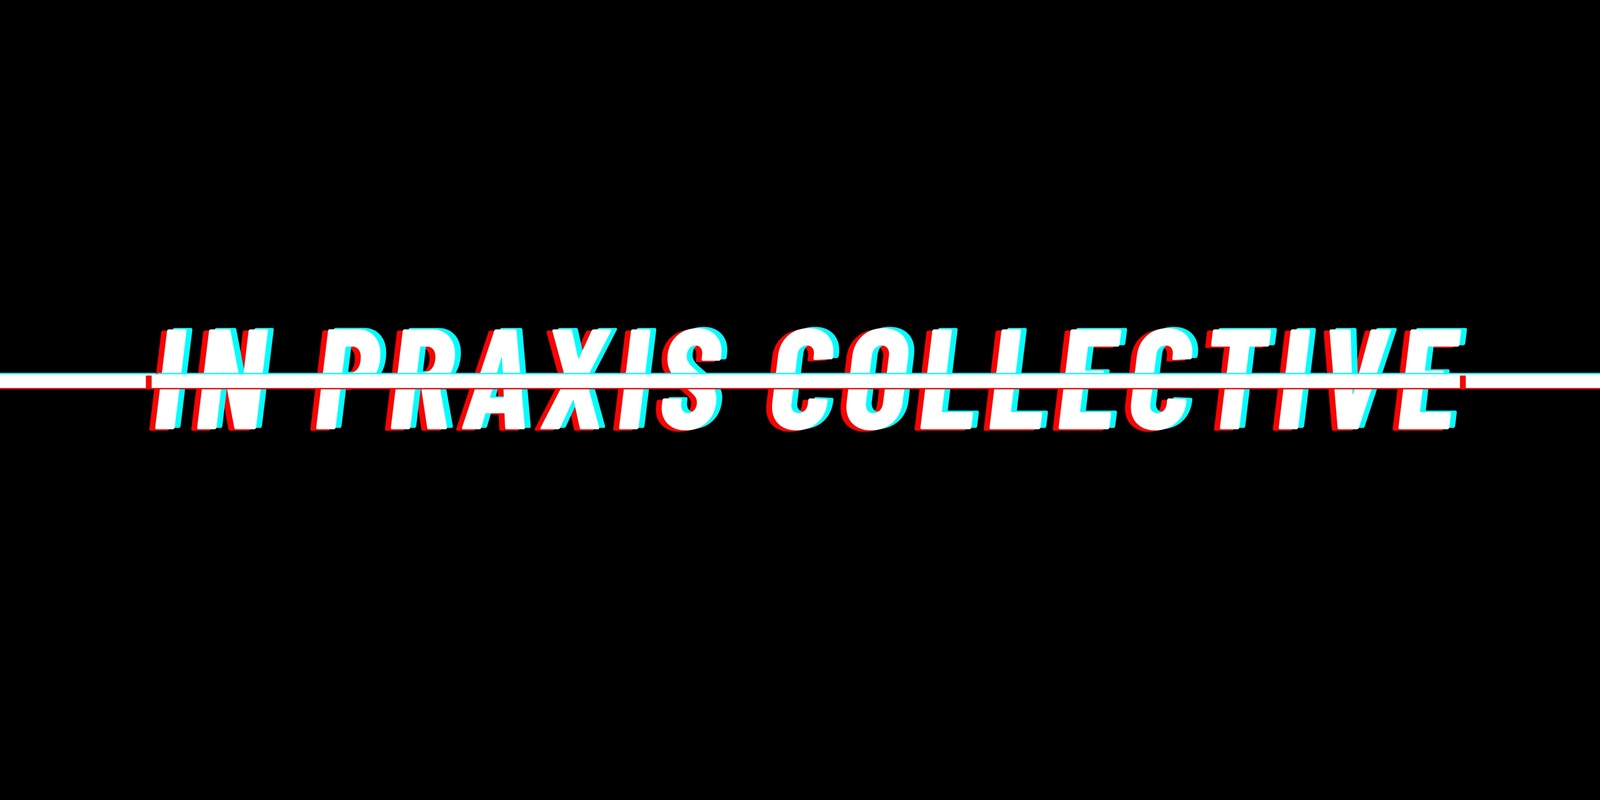 In Praxis Collective's banner